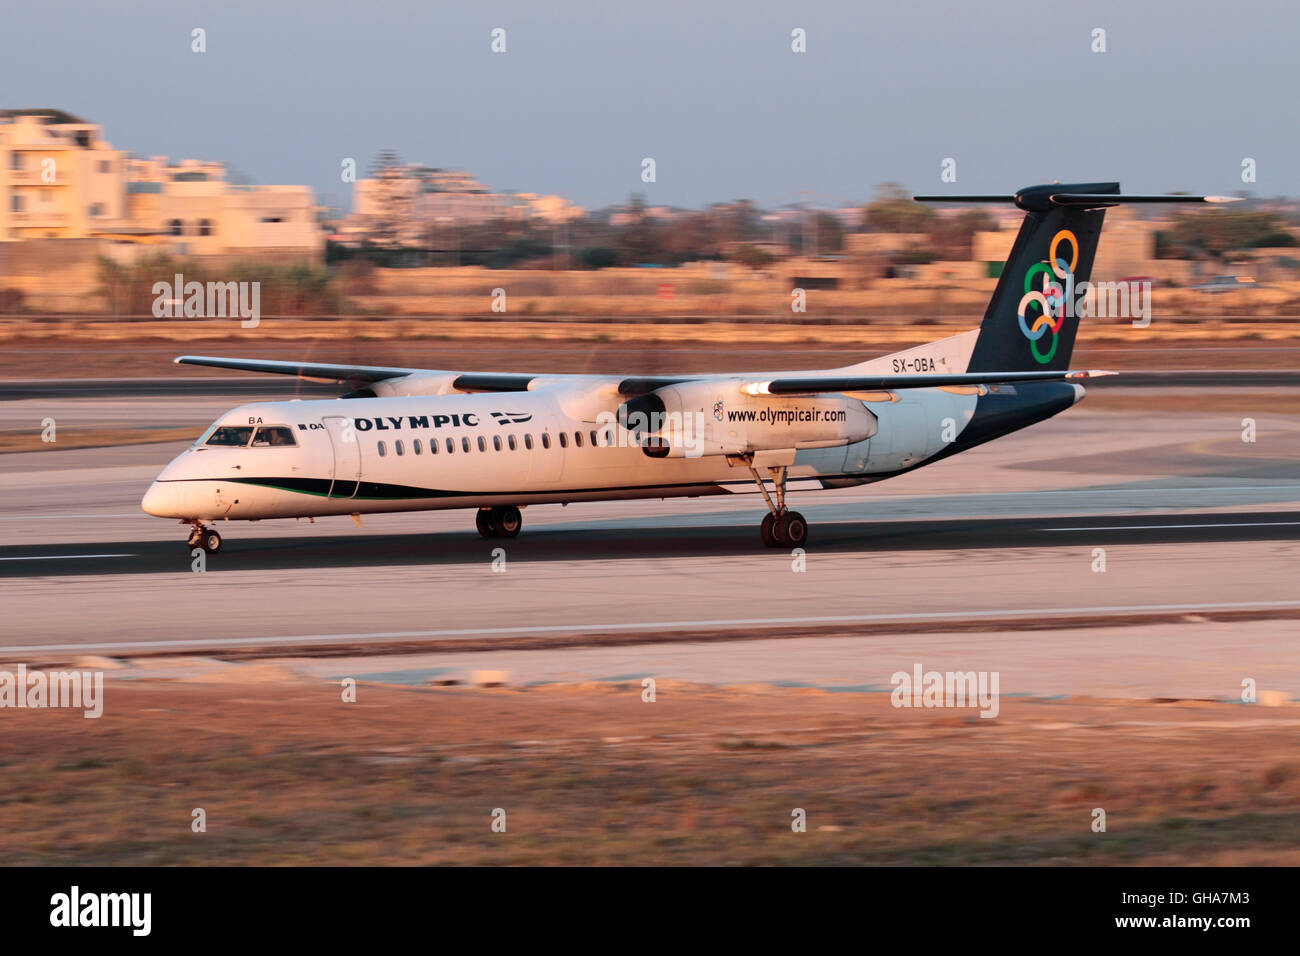 Olympic Air Bombardier Dash 8-Q400 propeller airplane taking off at sunset. Slow shutter speed used for panning, prop blur. Turboprop plane takeoff. Stock Photo